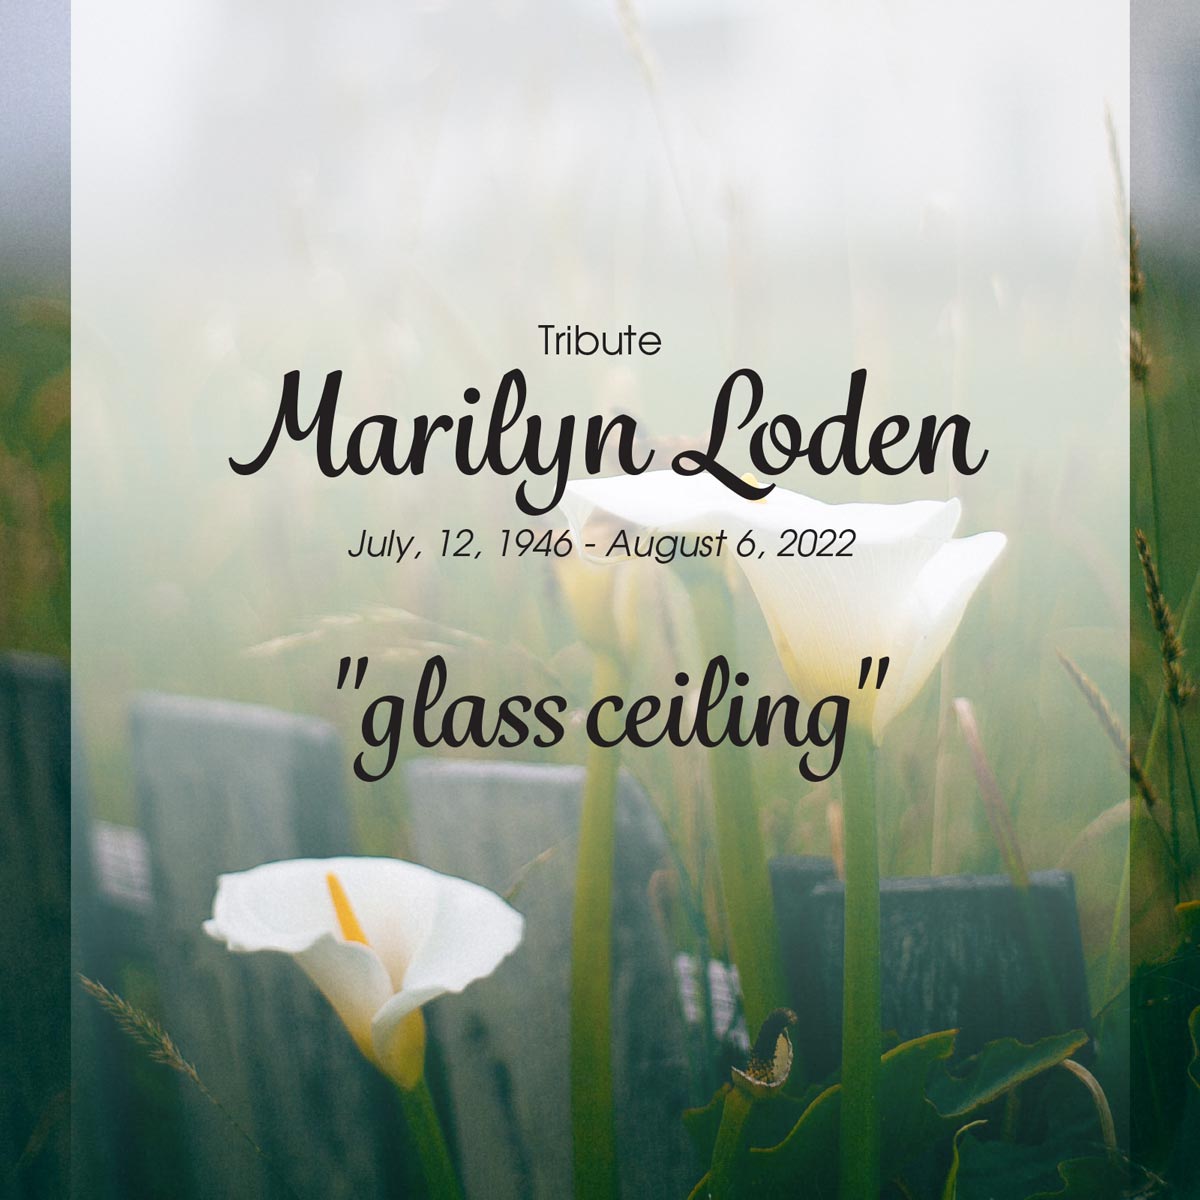 Tribute Marilyn Loden July, 12, 1946 - August 6, 2022 glass ceiling